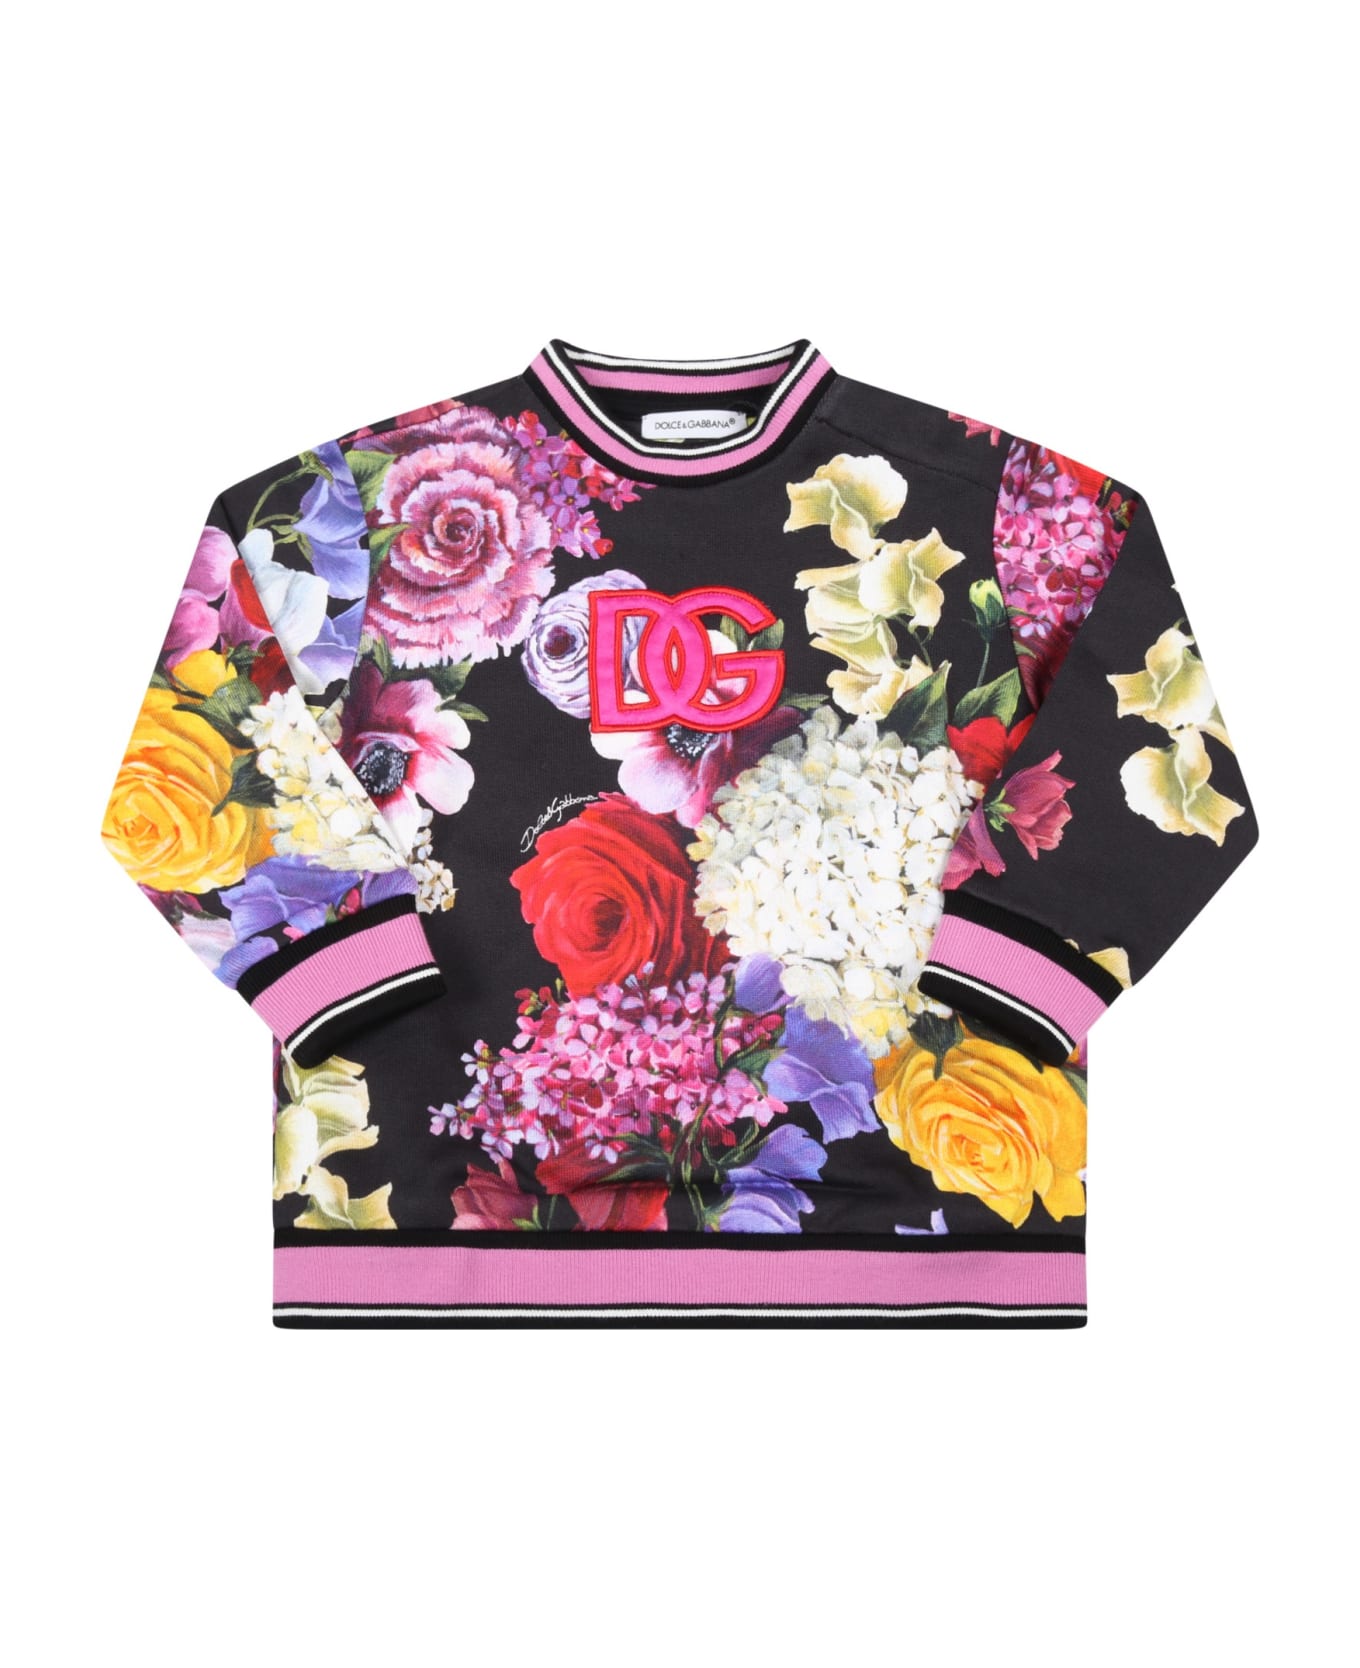 Dolce & Gabbana Black Sweatshirt For Baby Girl With Floral Print And Logo - Multicolor